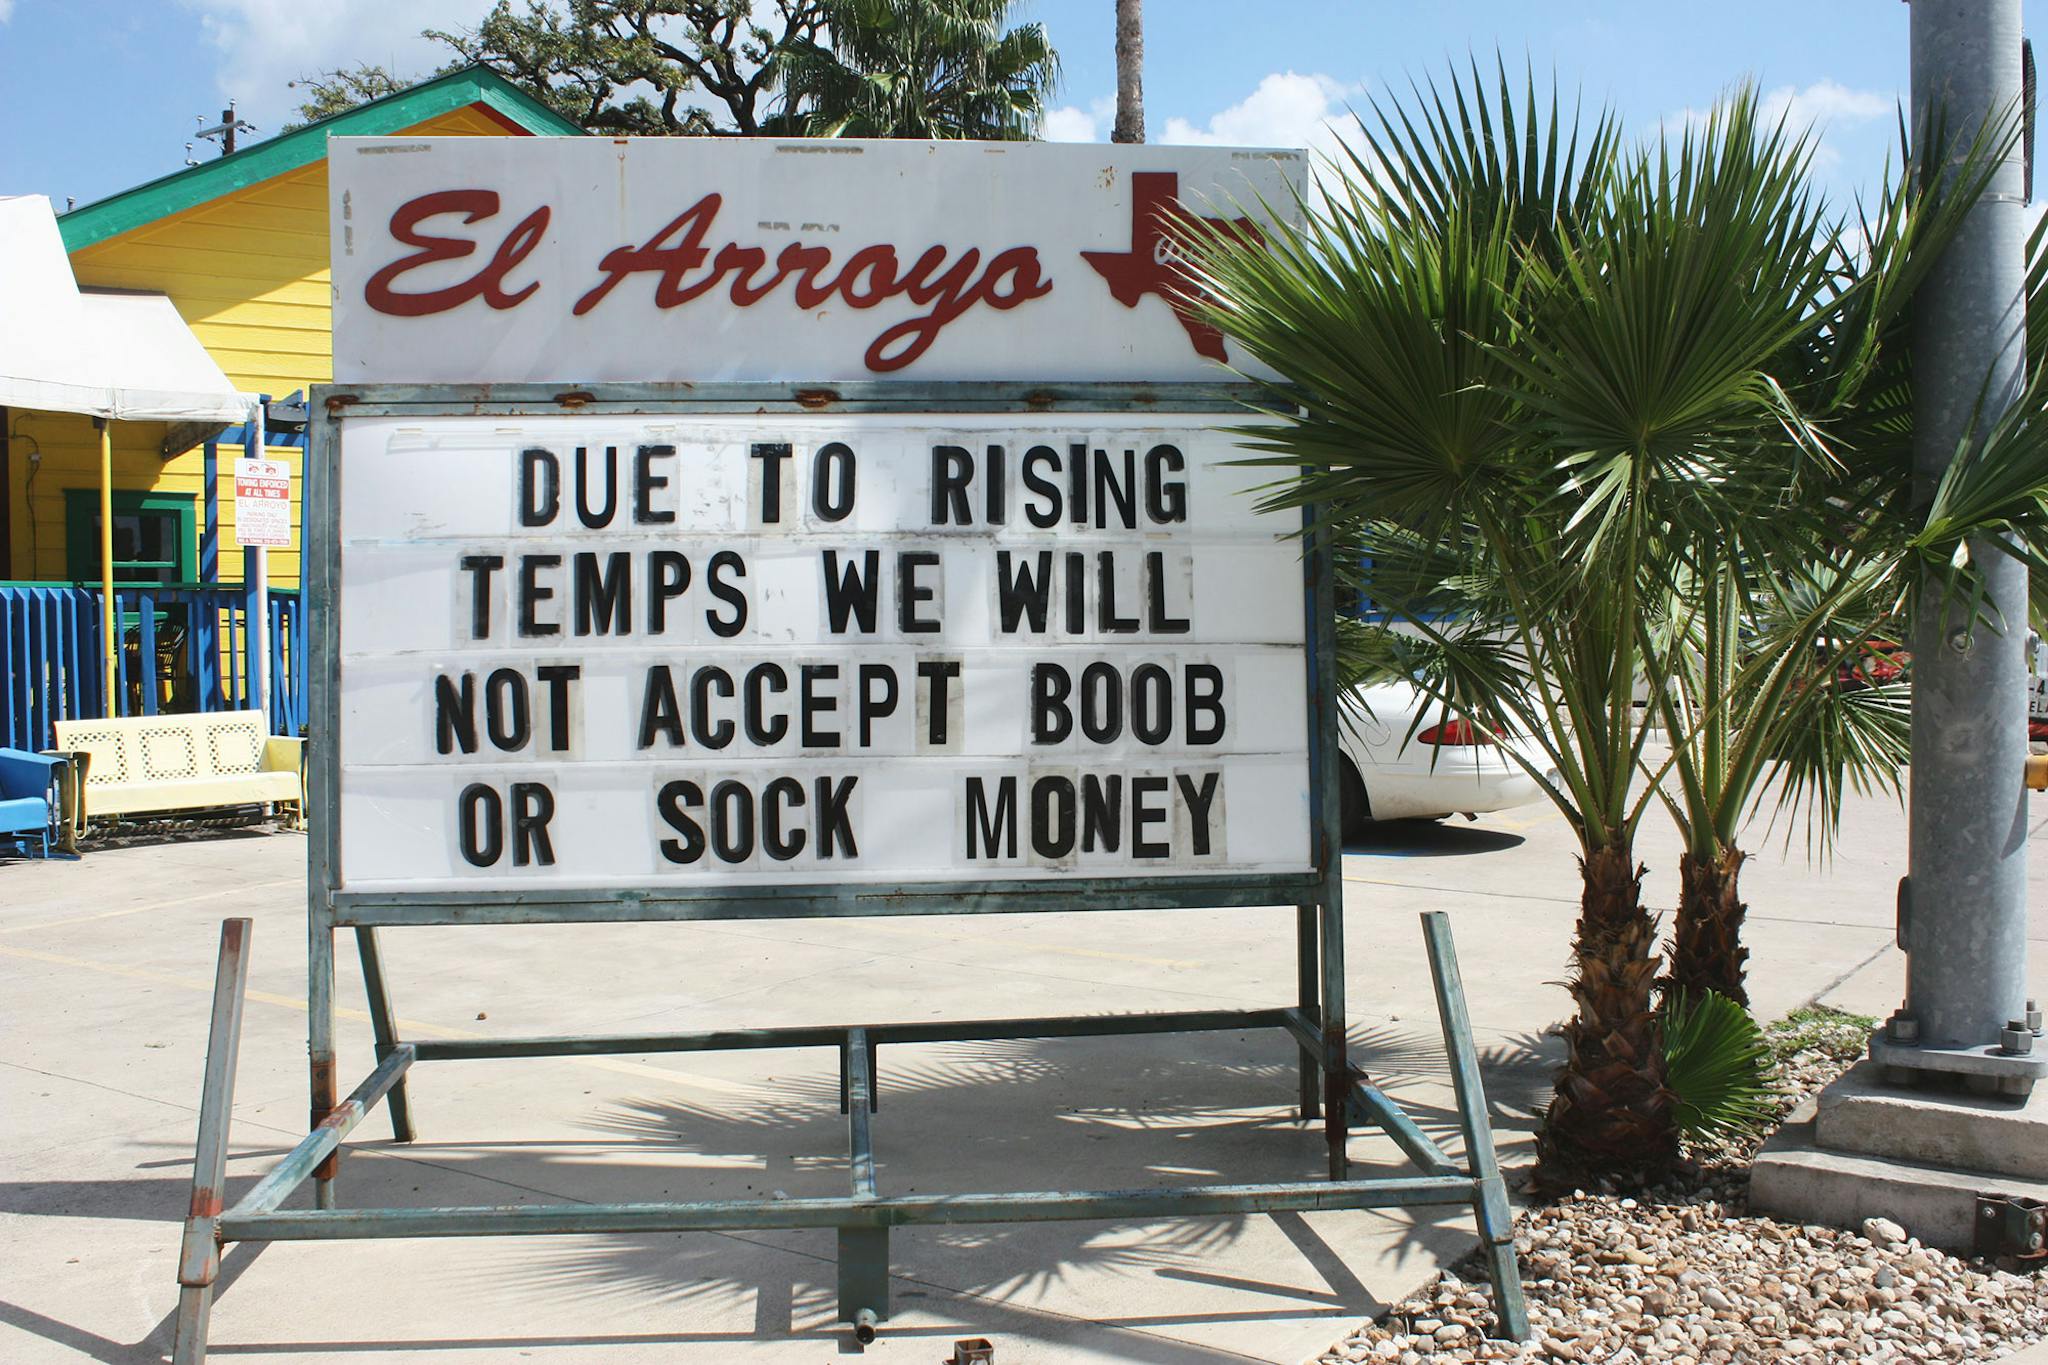 El Arroyo sign says due to rising temps we will not accept boob or sock money.